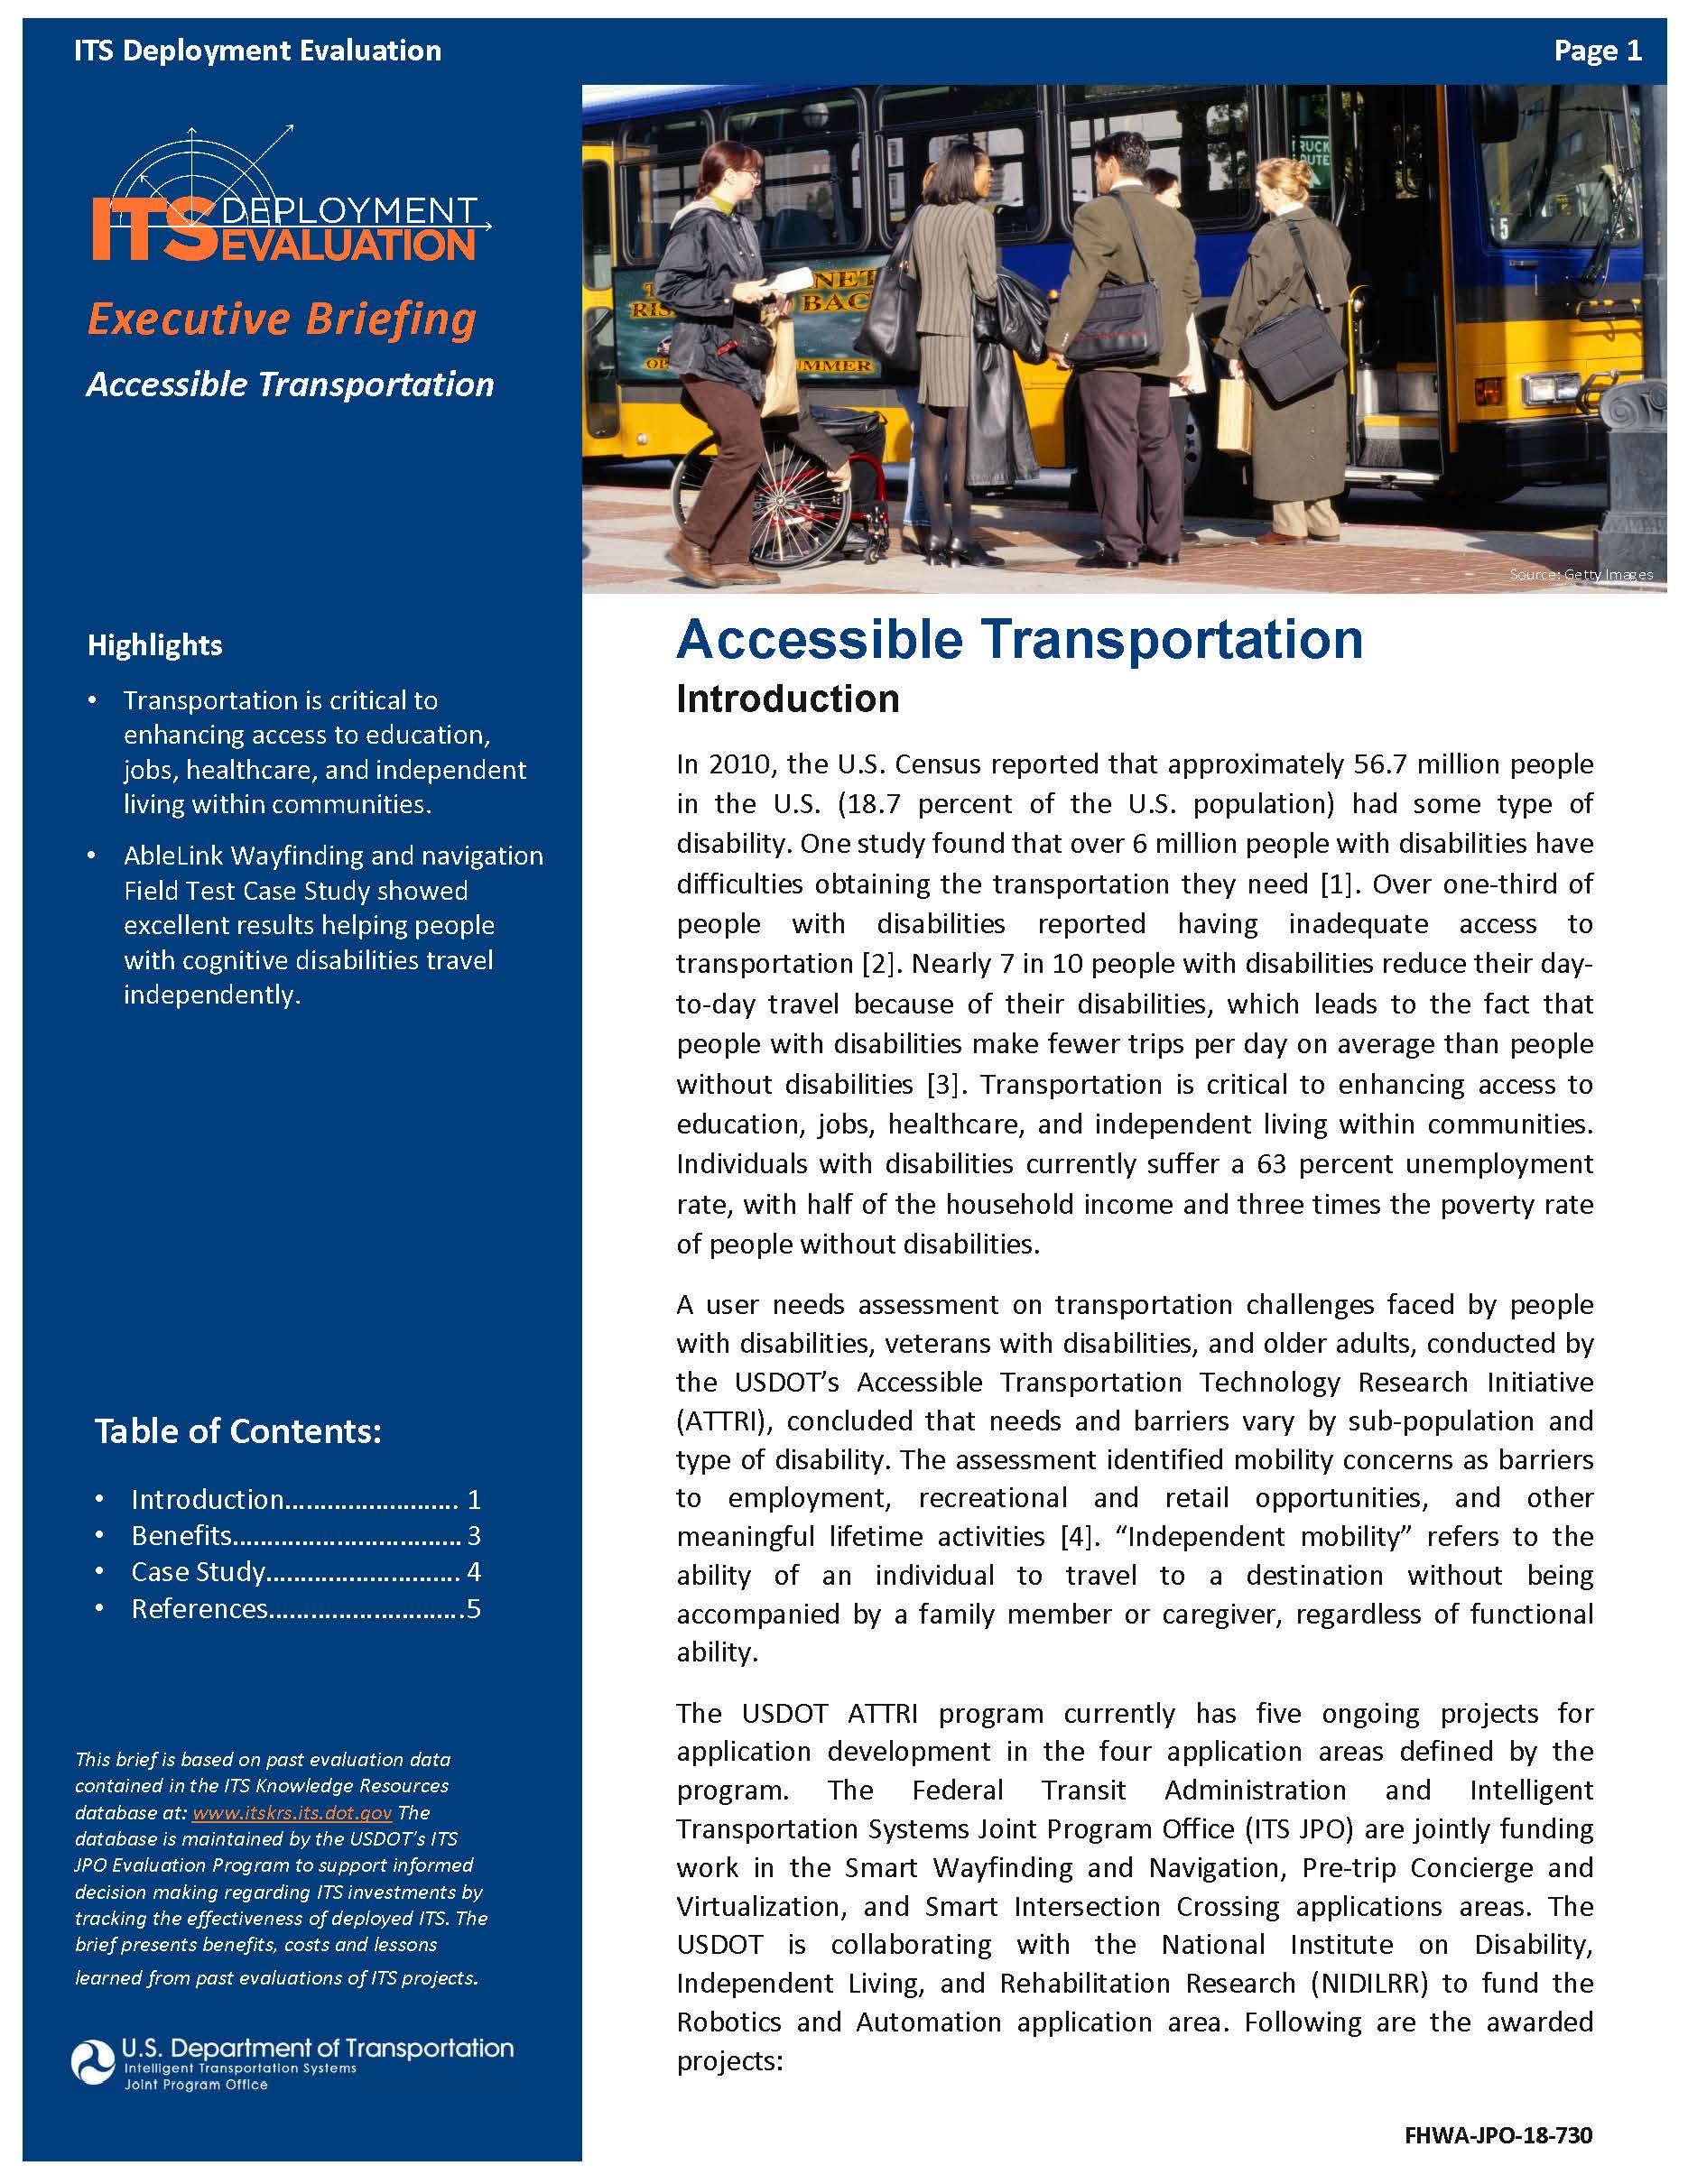 Cover Page of the Accessible Transportation 2019 Executive Briefing